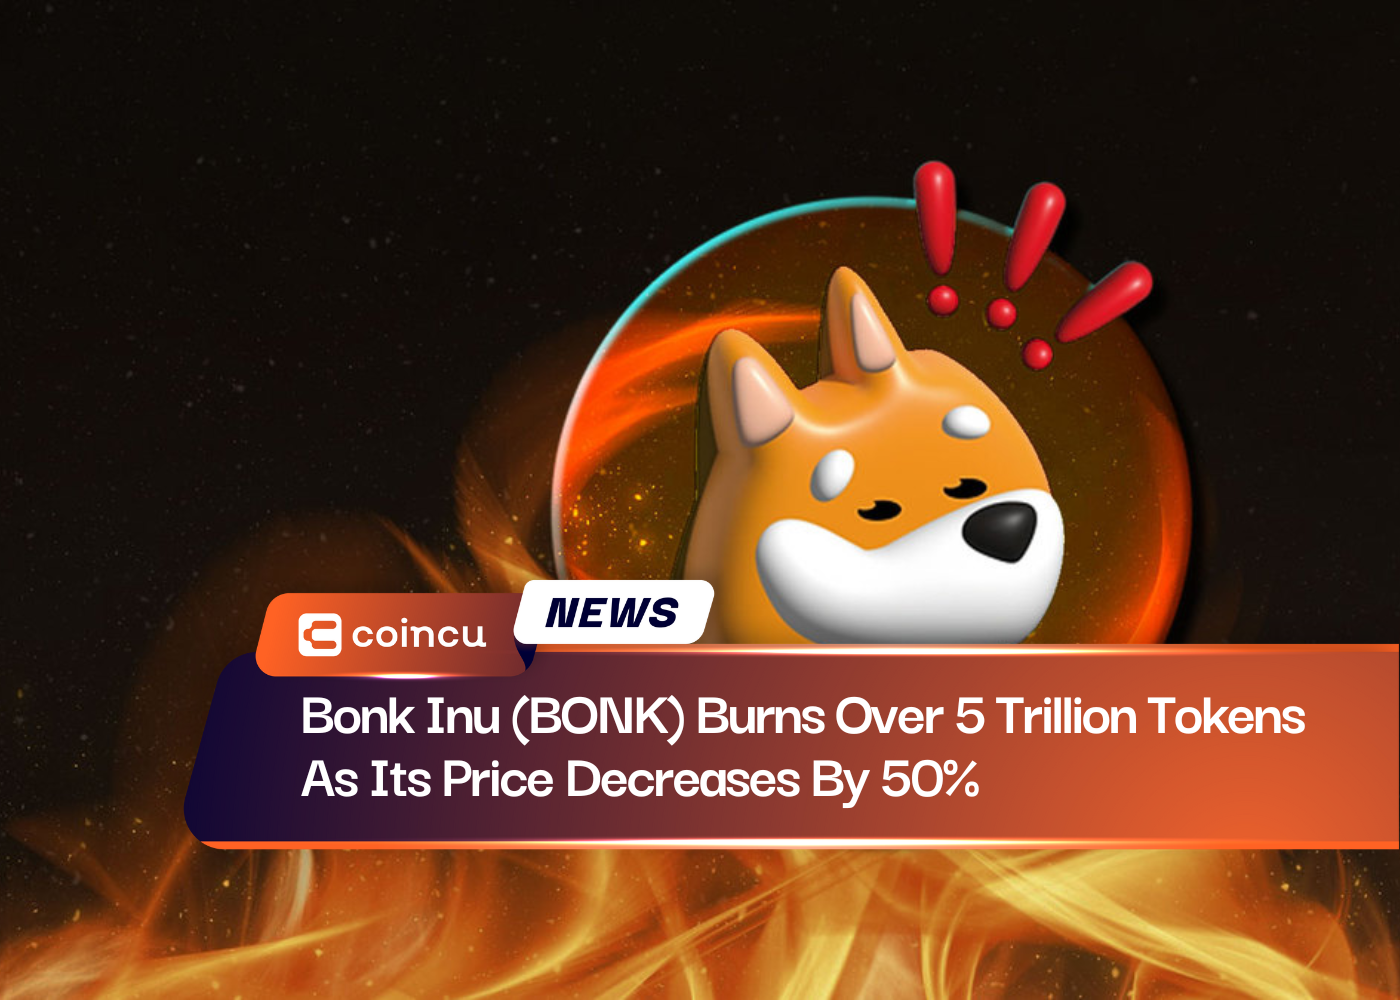 Bonk Inu (BONK) Burns Over 5 Trillion Tokens As Its Price Decreases By 50%